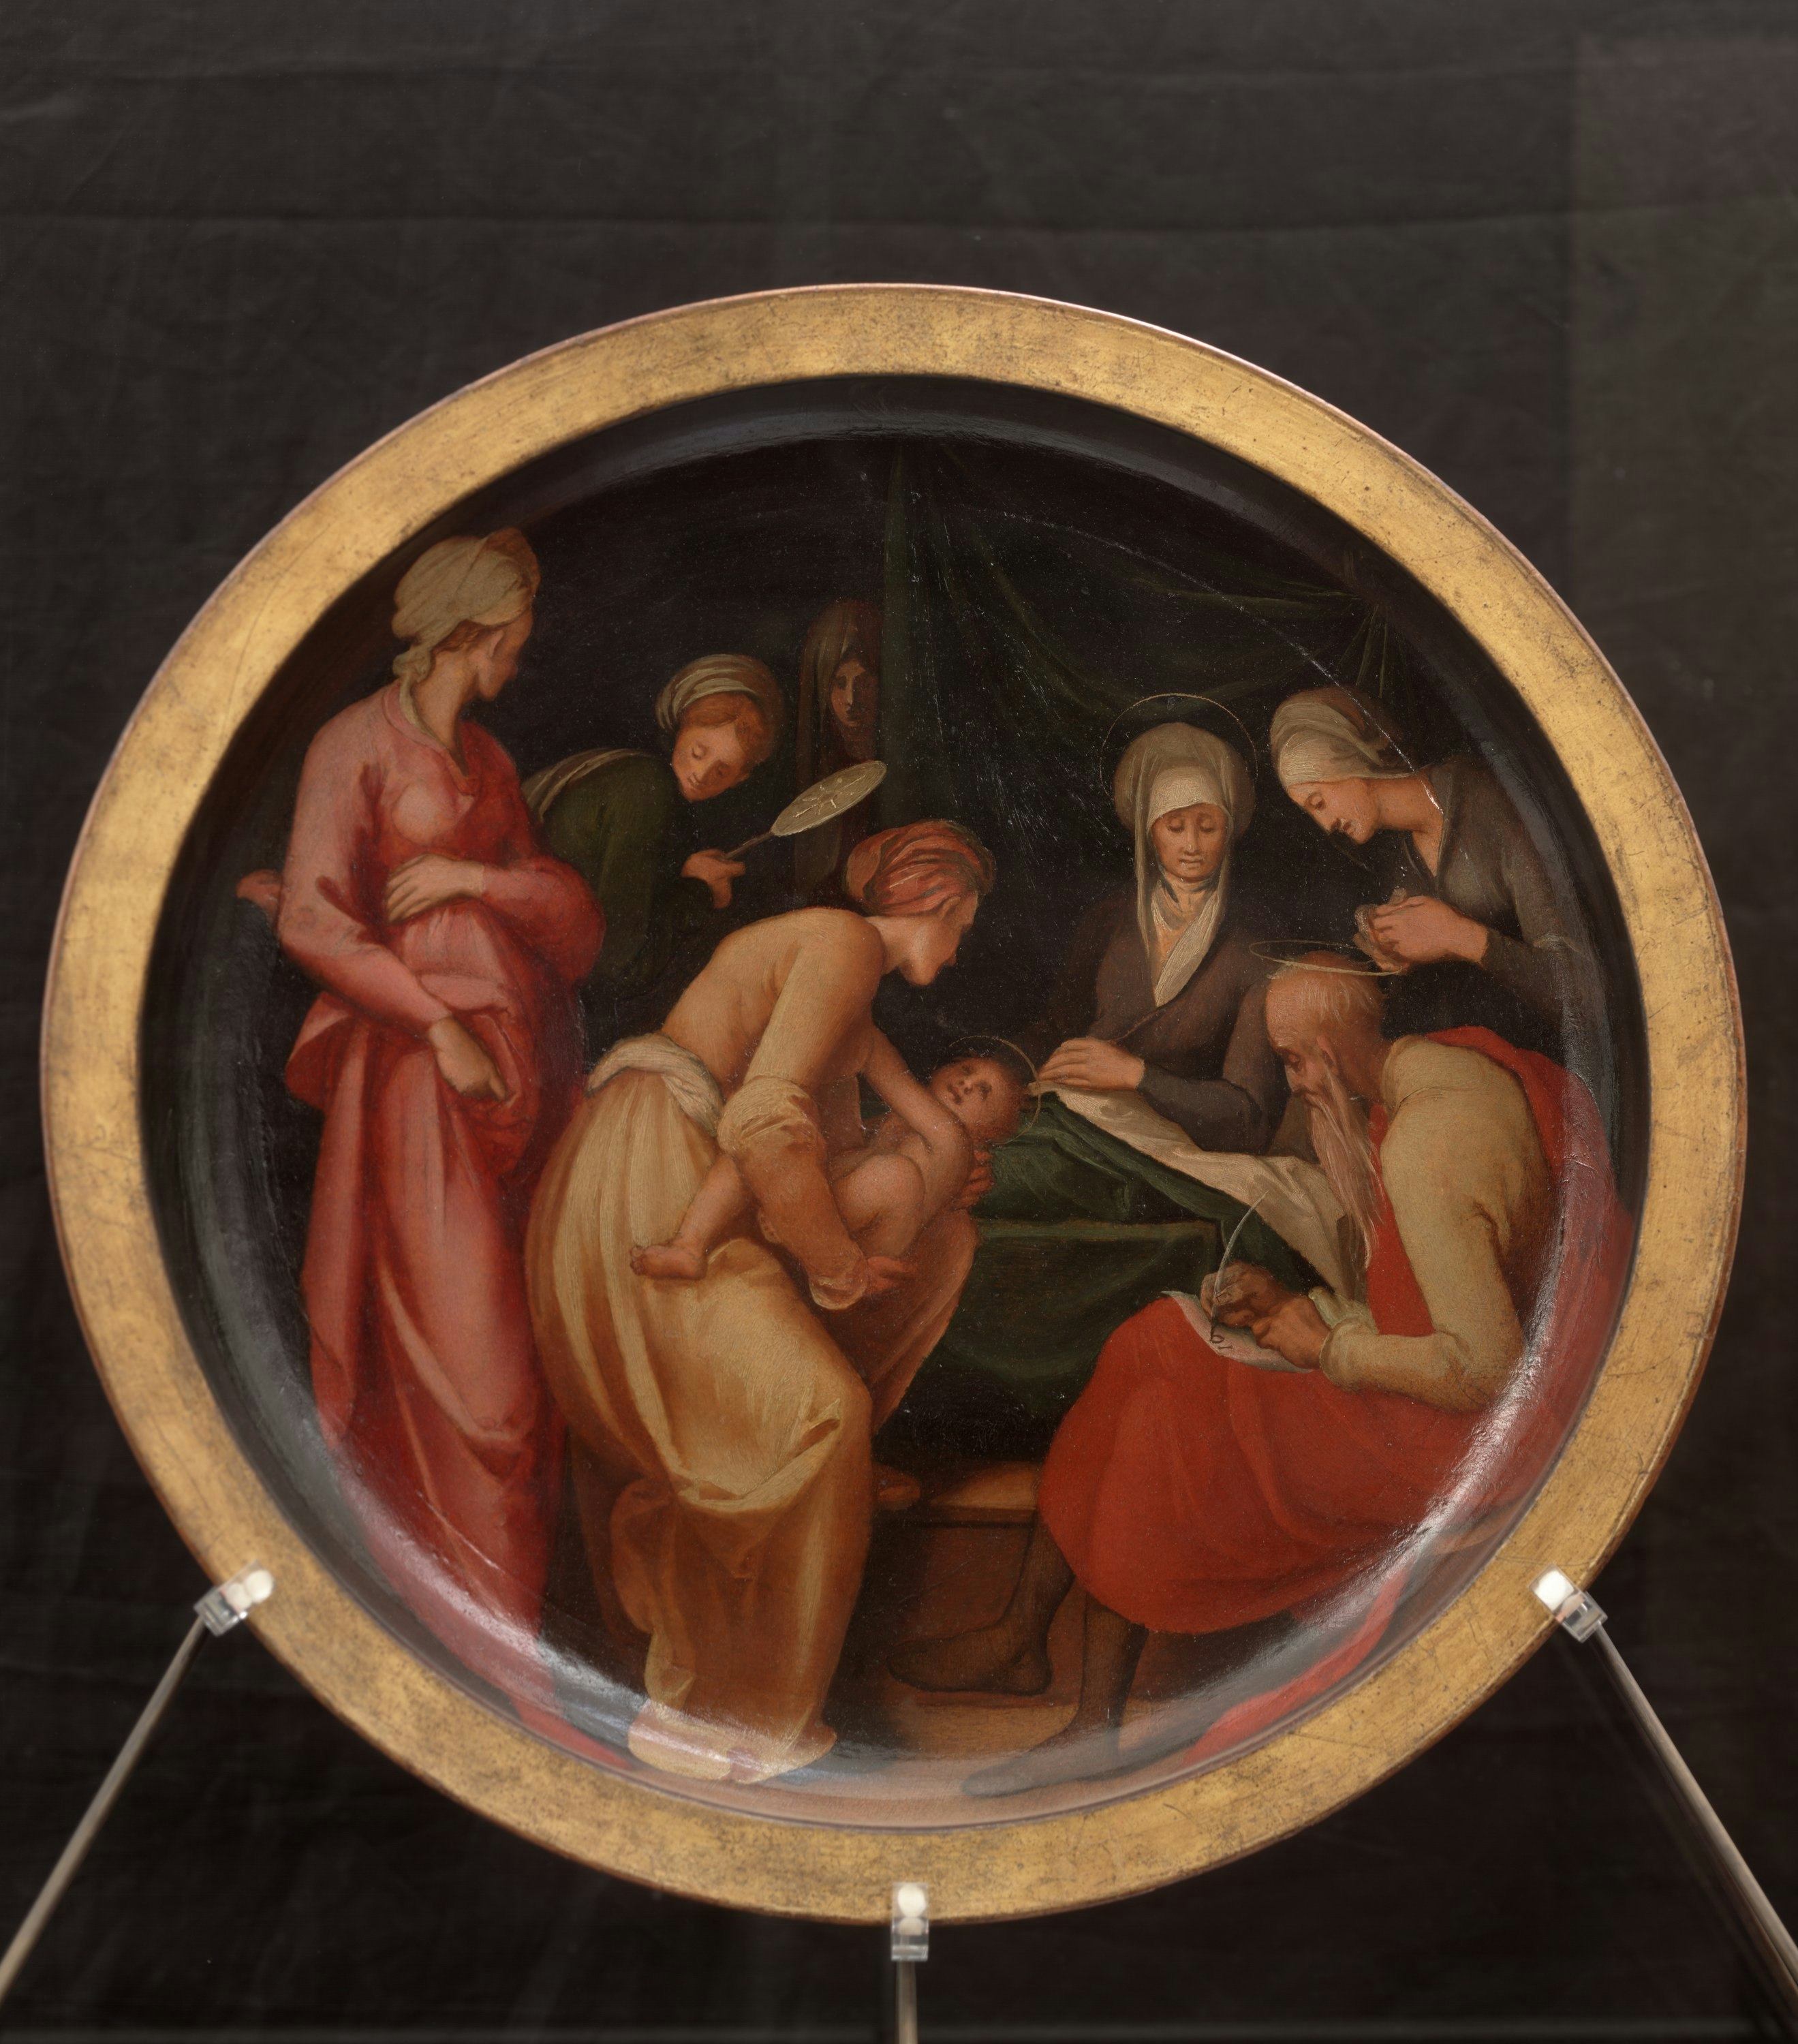 Birthing tray. Birth of St John the Baptist (back), coats of arms for the union of Girolamo della Casa and Lisabetta Tornaquinci (front)